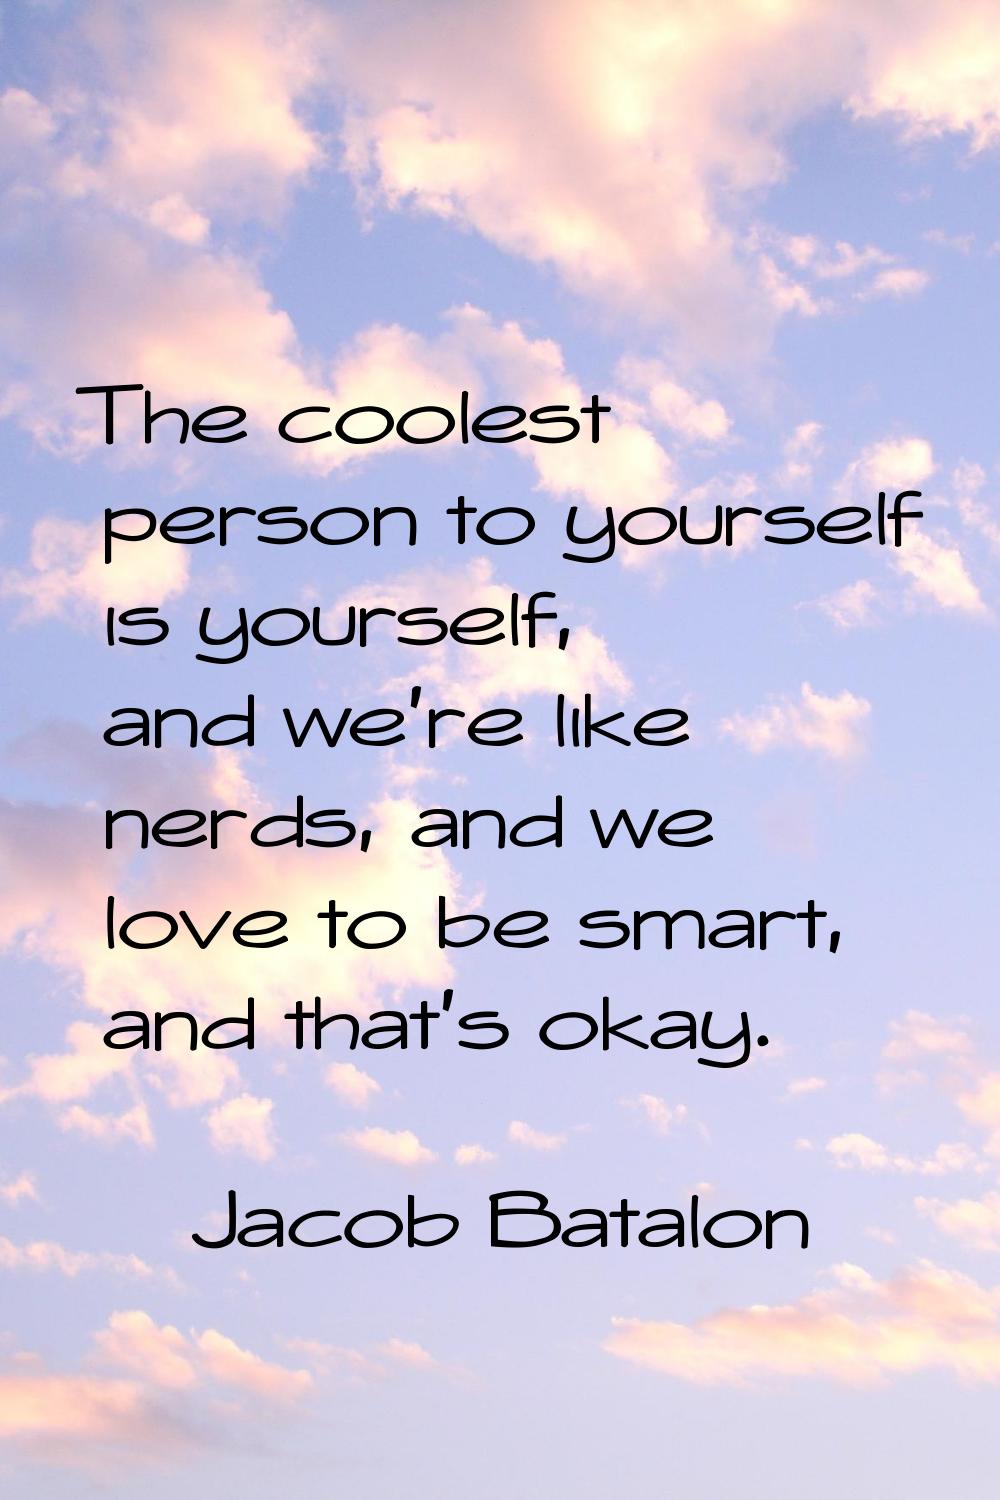 The coolest person to yourself is yourself, and we're like nerds, and we love to be smart, and that